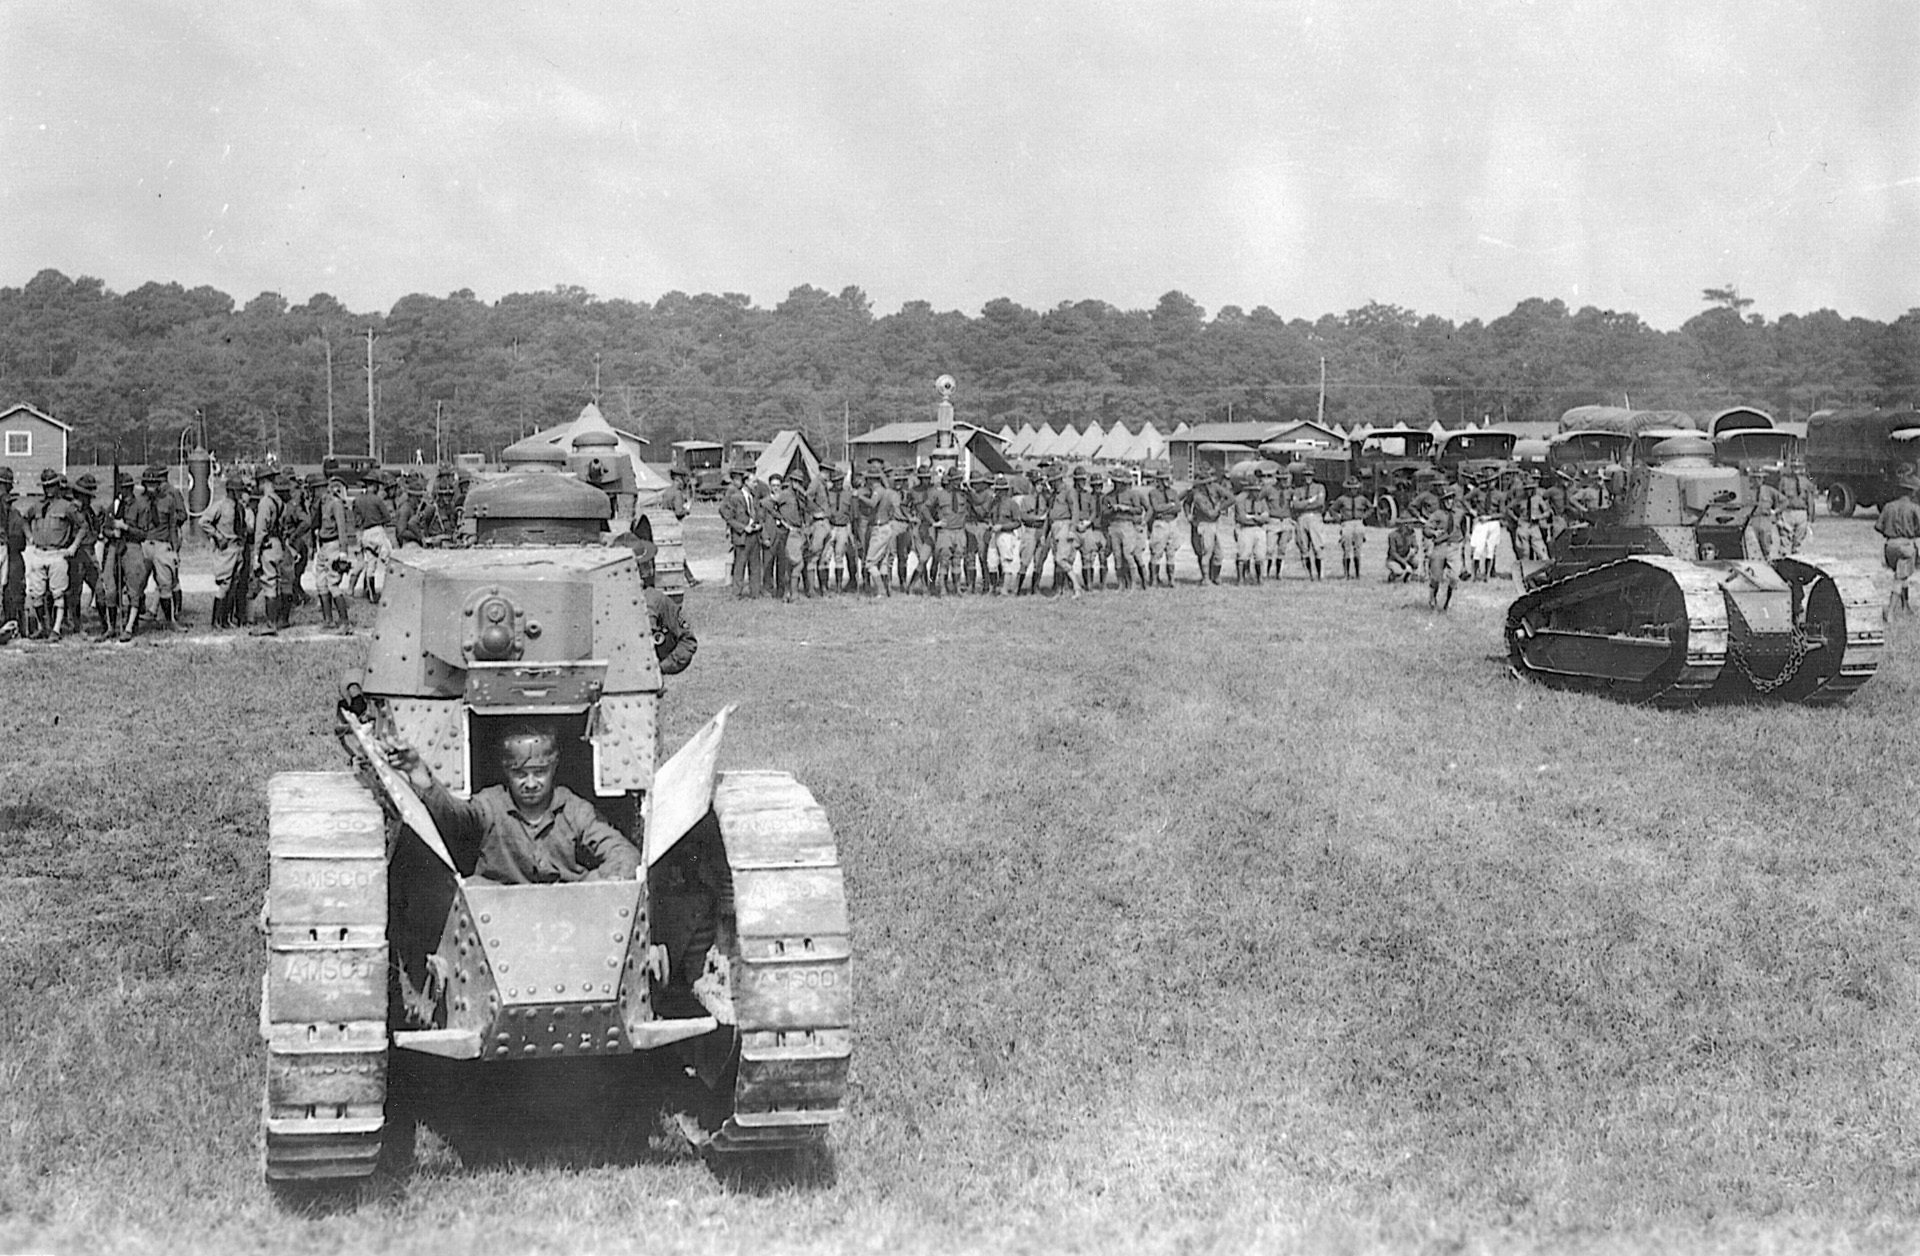 In September 1936, tanks of the U.S. Army are put through their paces before an interested crowd at Virginia Beach, Va.